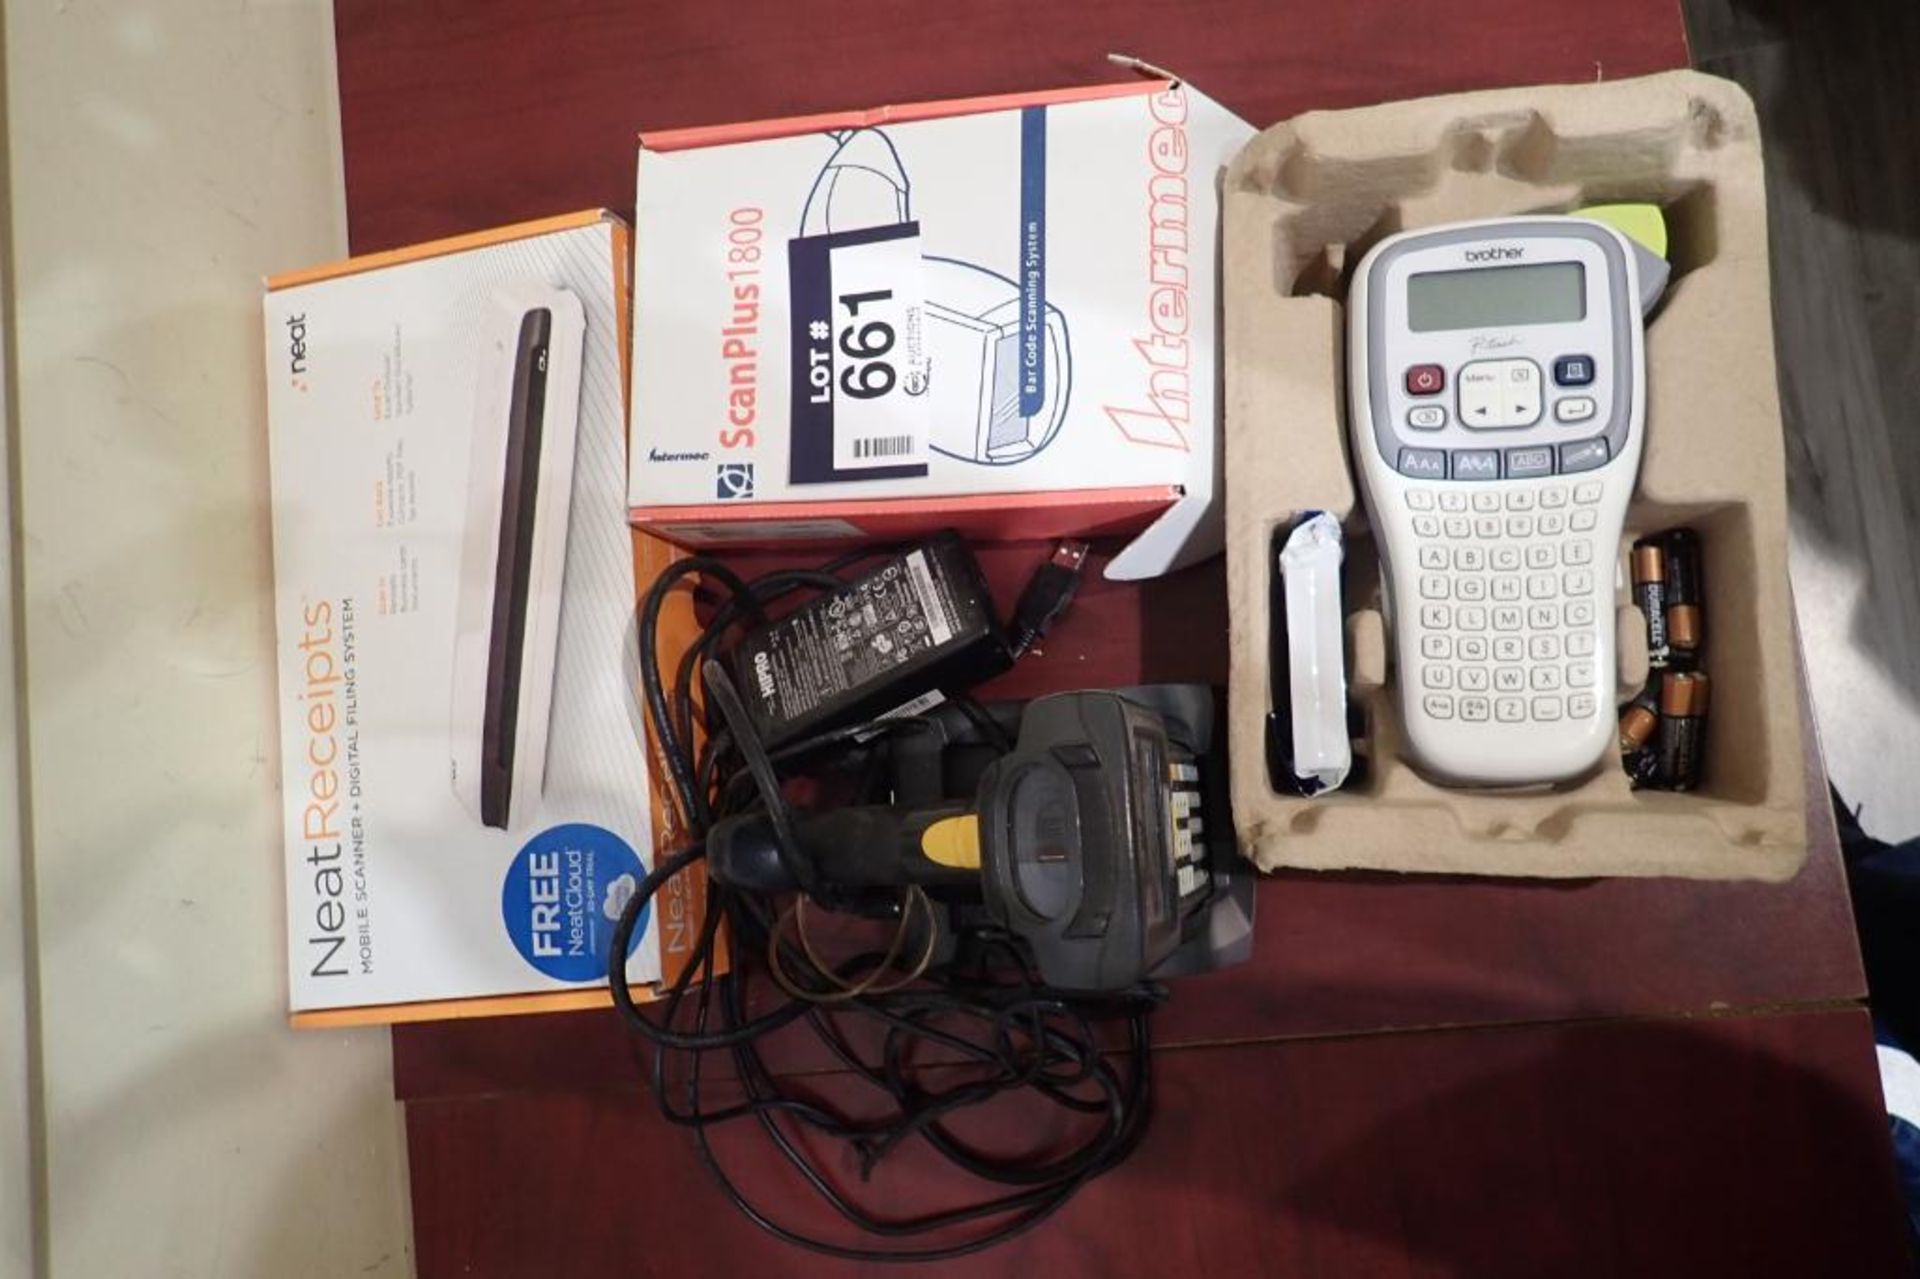 Lot of Brother Label Maker, Neat Mobile Scanner, and 2 Bar Code Scanners-USED.